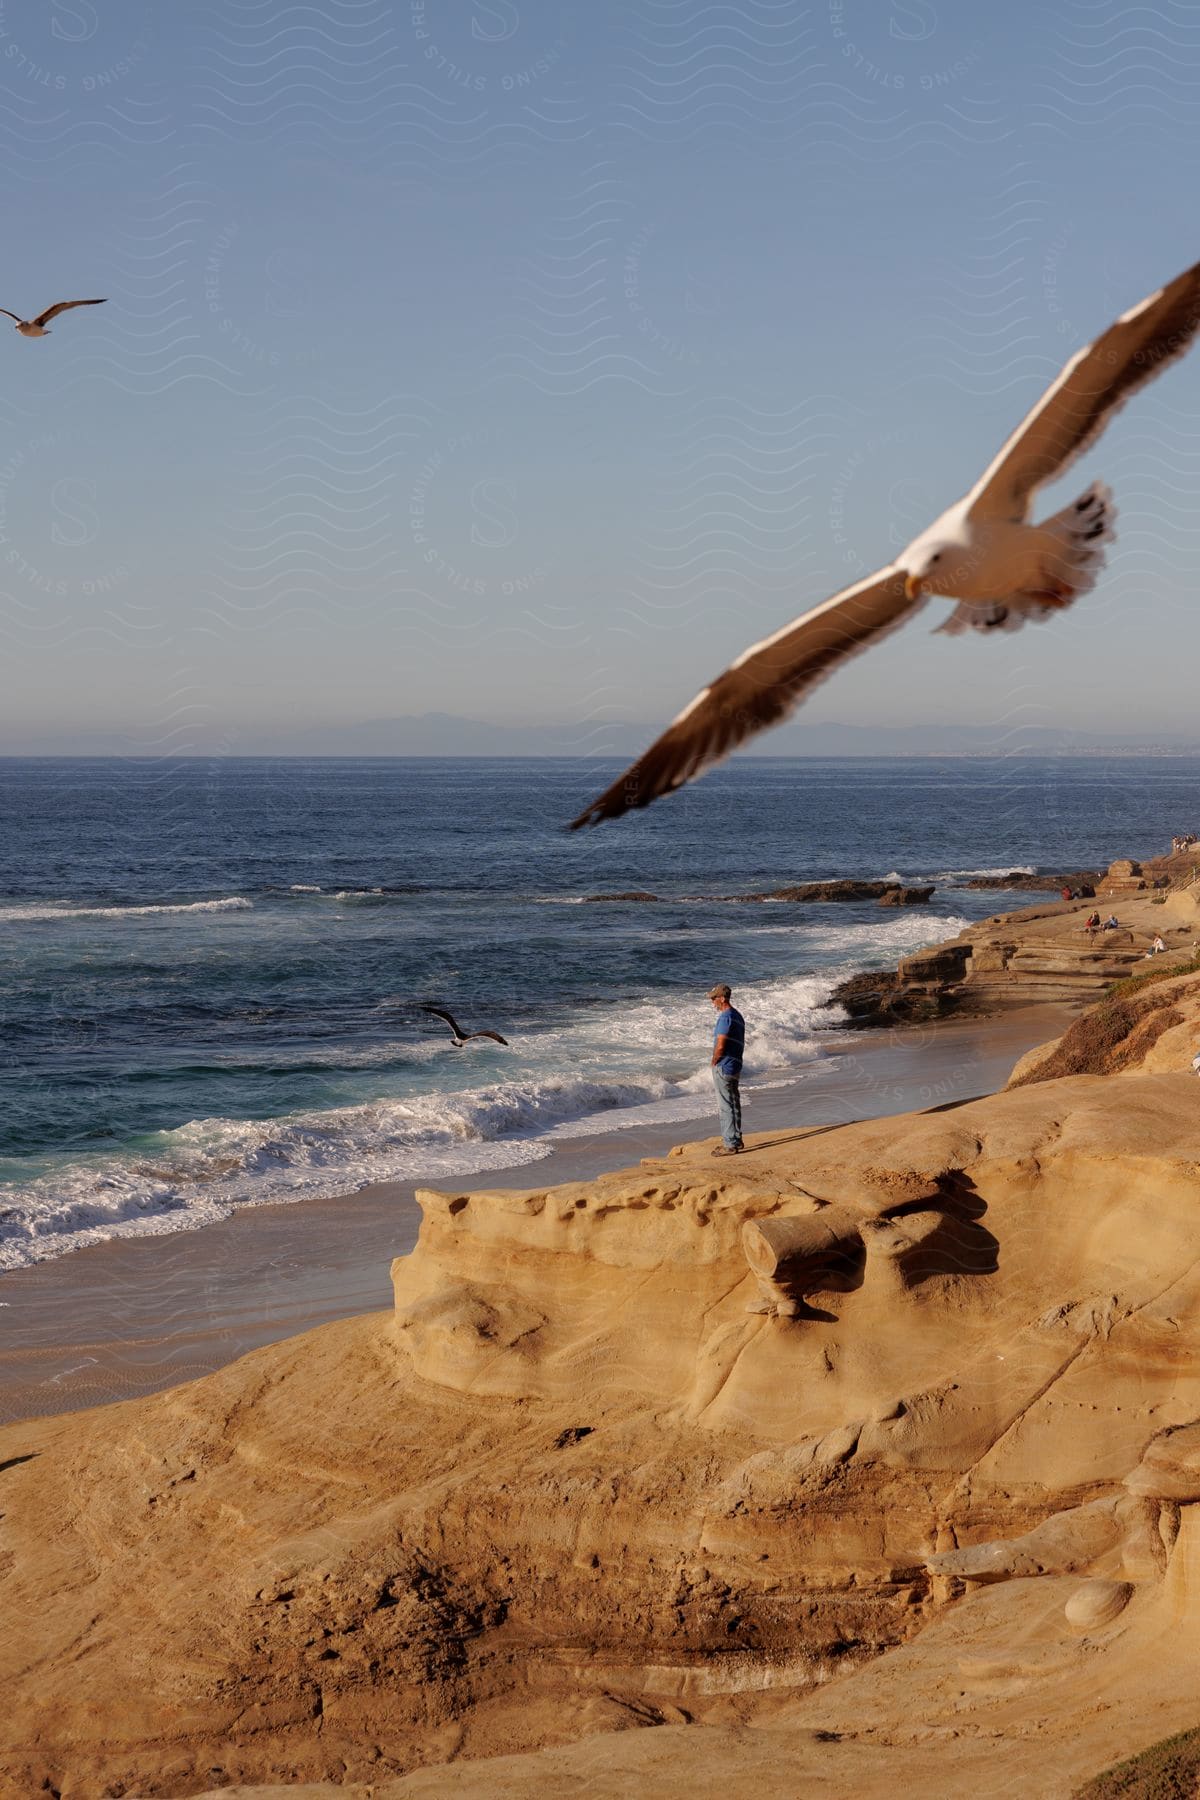 Stock photo of a person stands on the edge of a small sand hill in front of the beach watching the ocean while seagulls fly around.